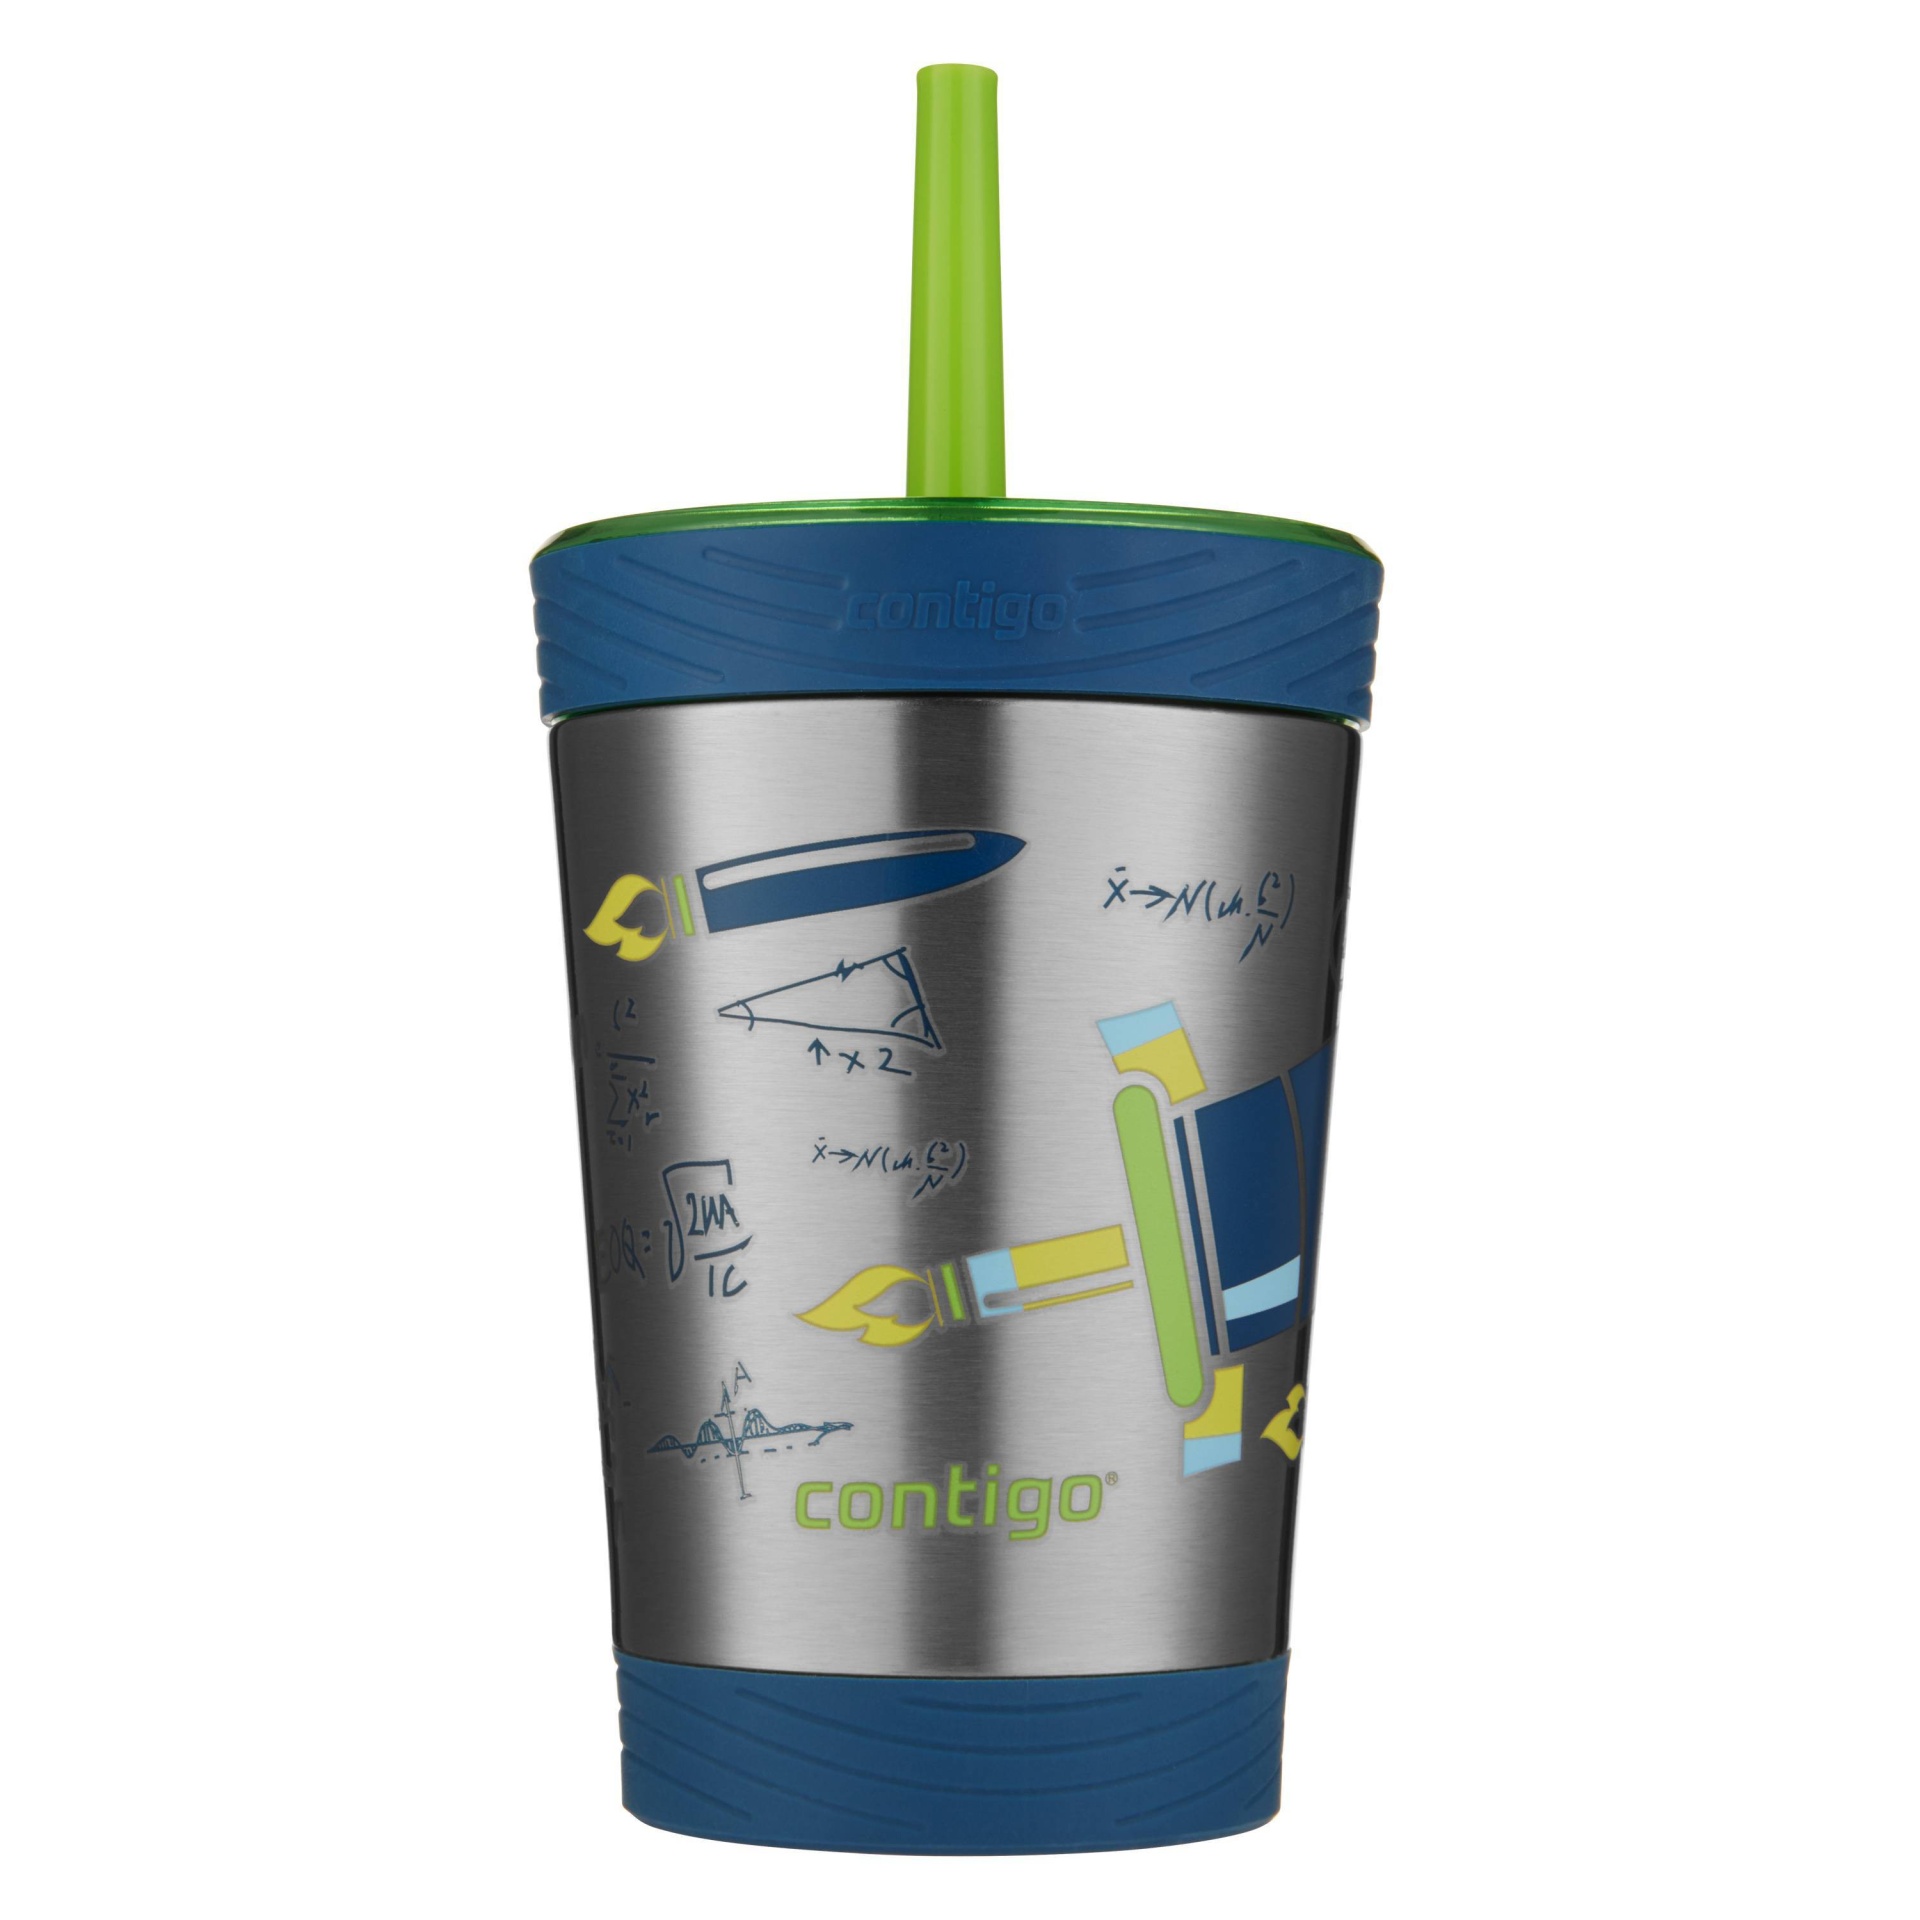 Contigo 12oz Stainless Steel Math Kids Spill-Proof Tumbler with